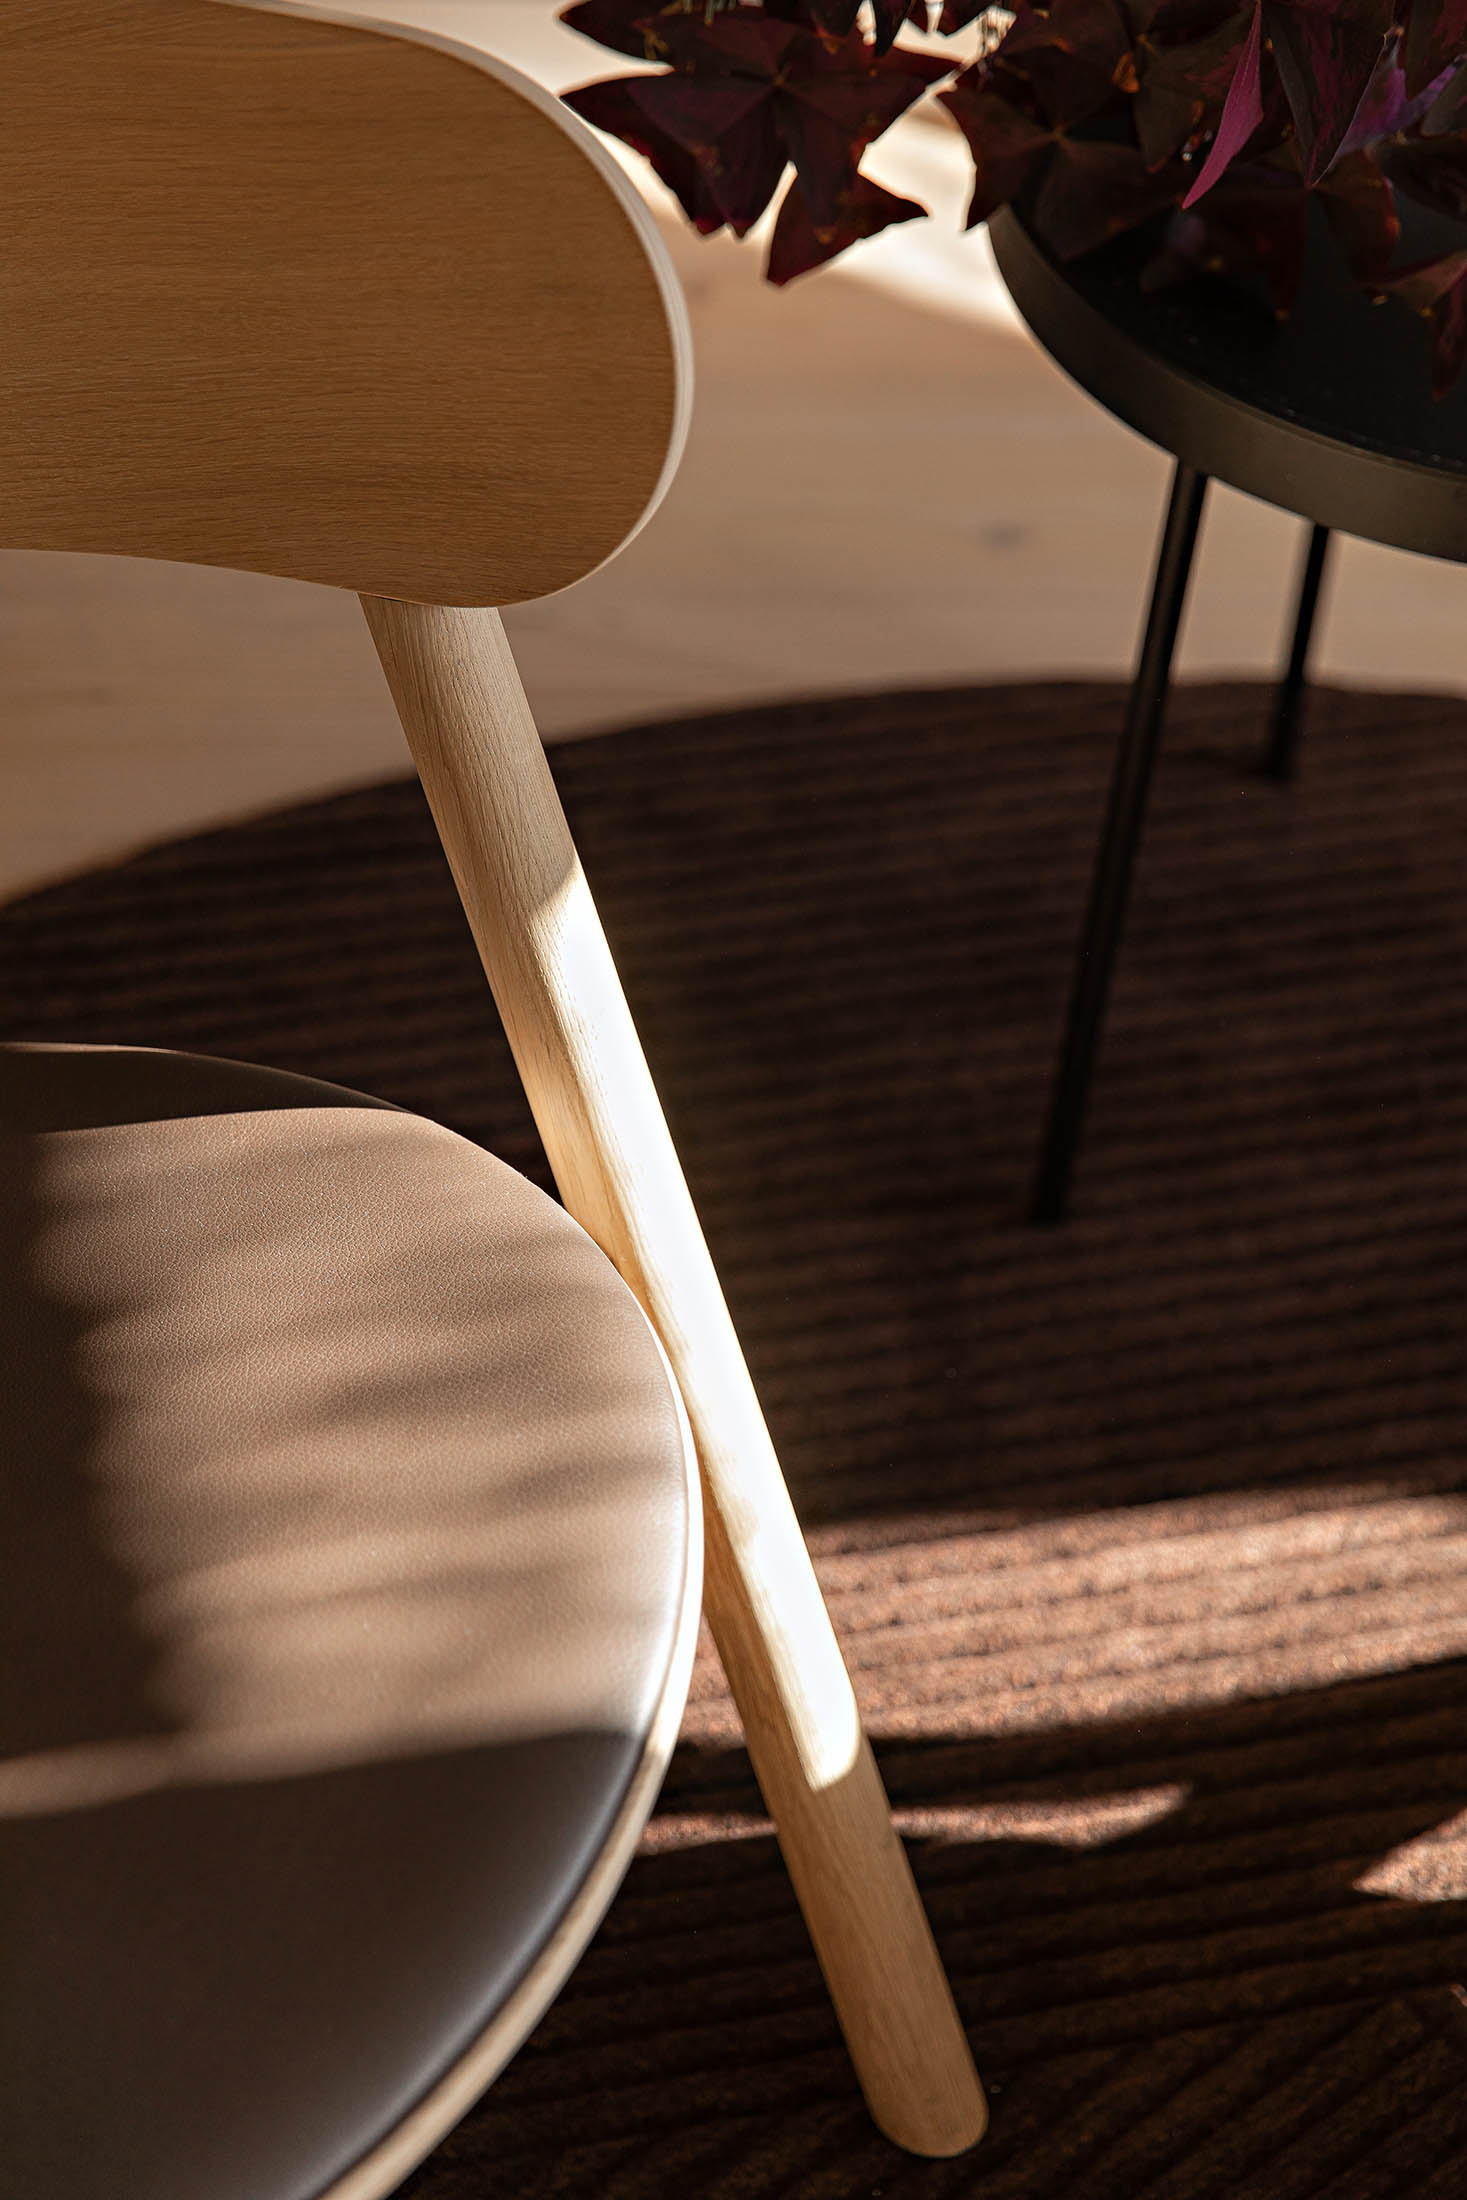 Ove Rogne apartment_Oaki_lounge_chair_sunlight_Closeup_Northern_Photo_Anne_Andersen_Low-res